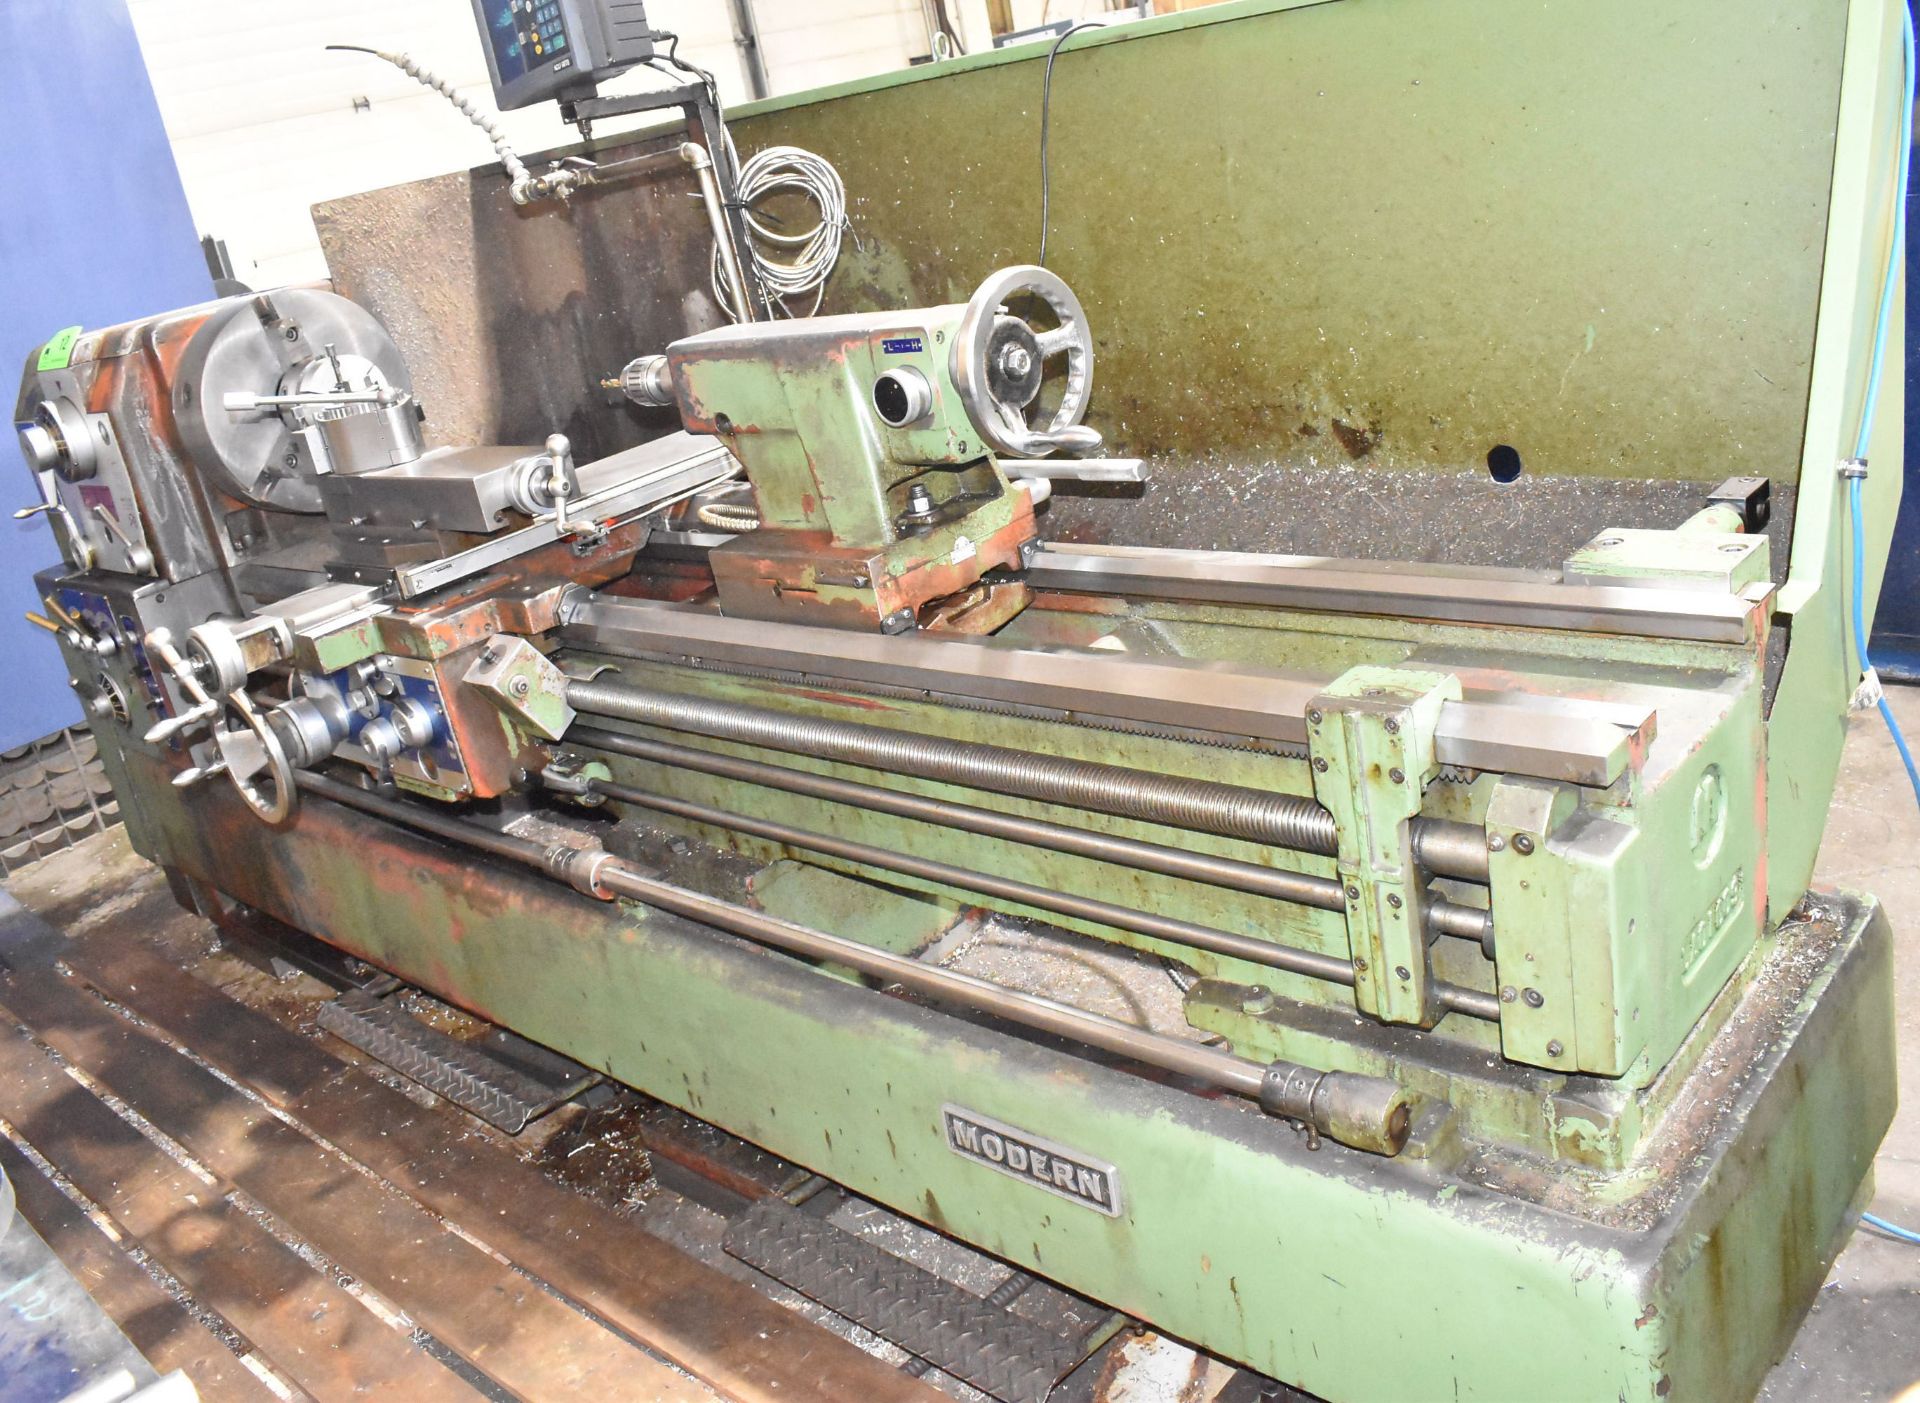 MODERN 22 80 GAP BED ENGINE LATHE WITH 22" SWING OVER BED, 31-3/8" SWING OVER GAP, 80" BETWEEN - Image 3 of 19